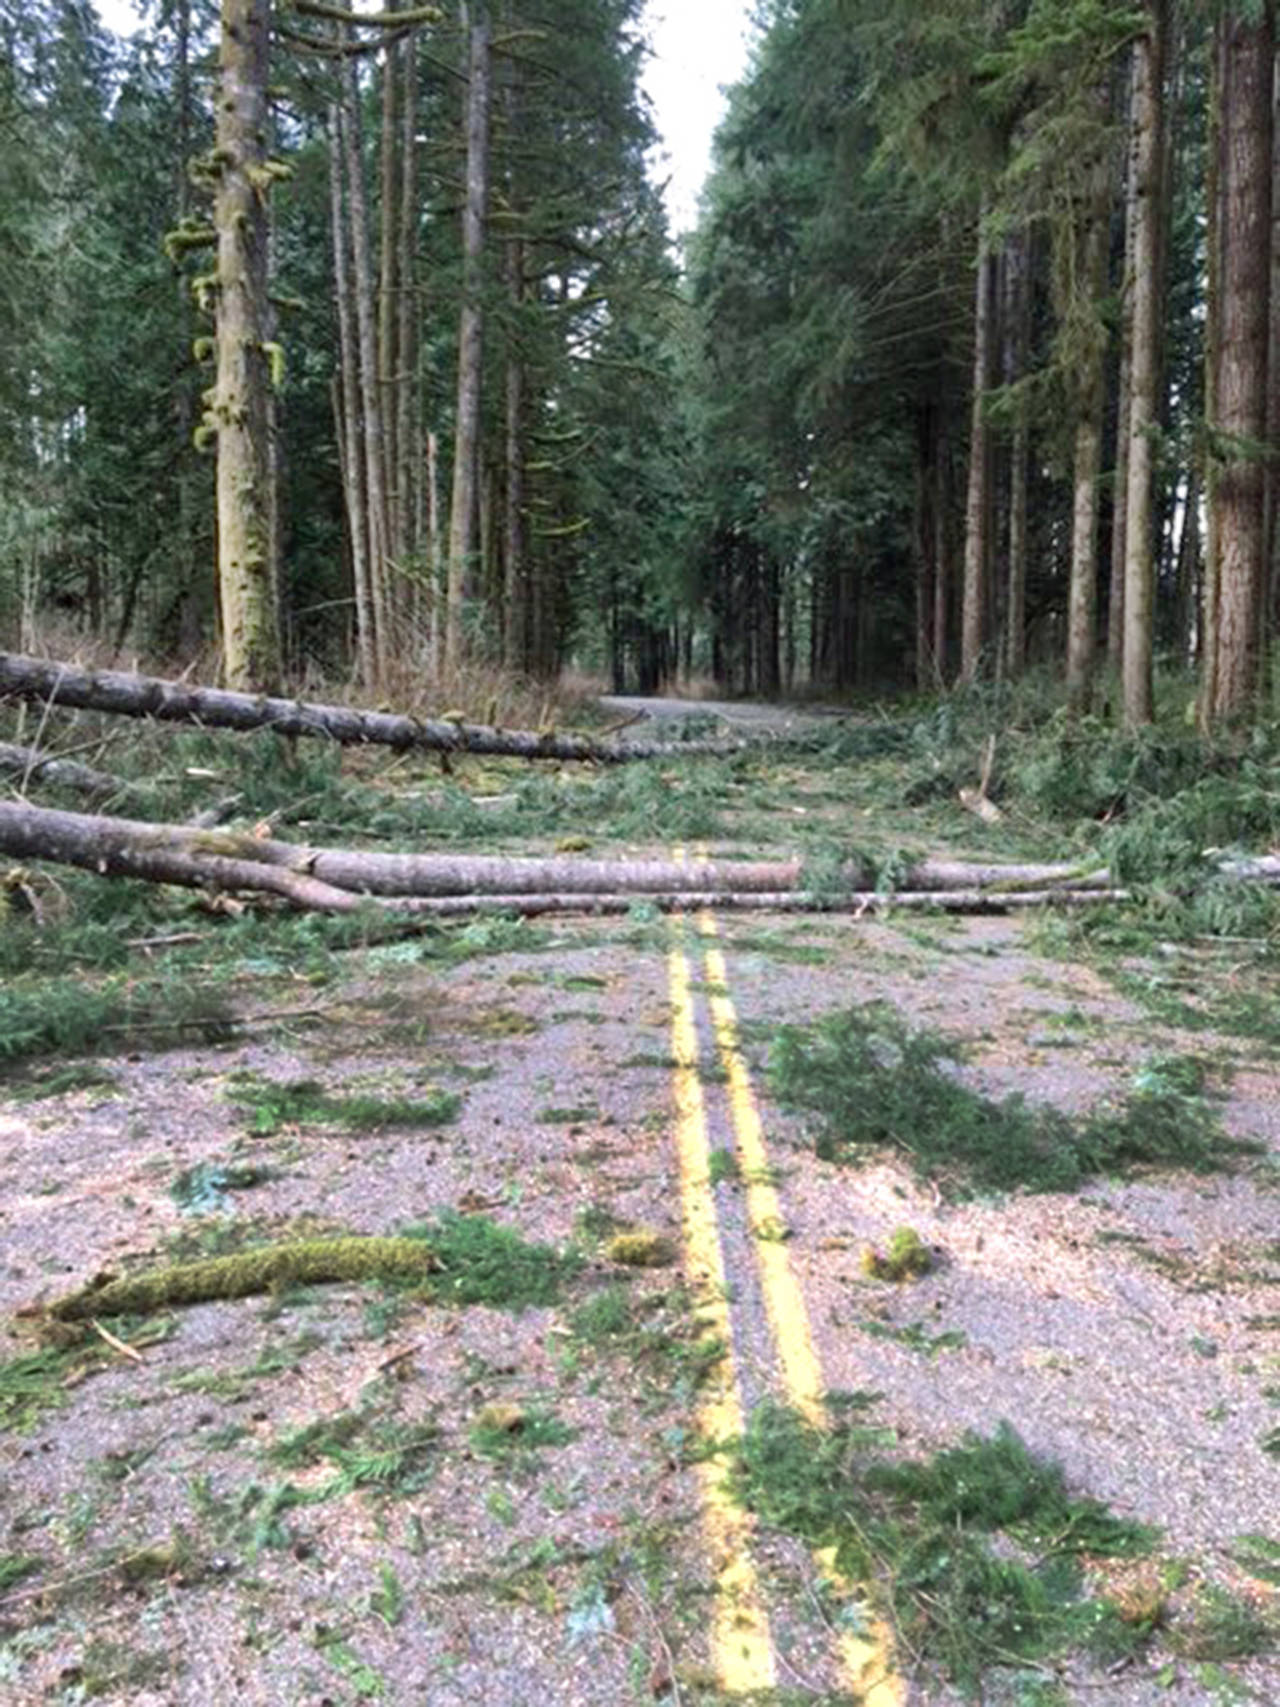 Sultan Basin Road closed for the investigation and because of downed trees in the roadway. These trees fell next to responding emergency vehicles, sending first responders running for safety. (Snohomish County Sheriff’s Office)